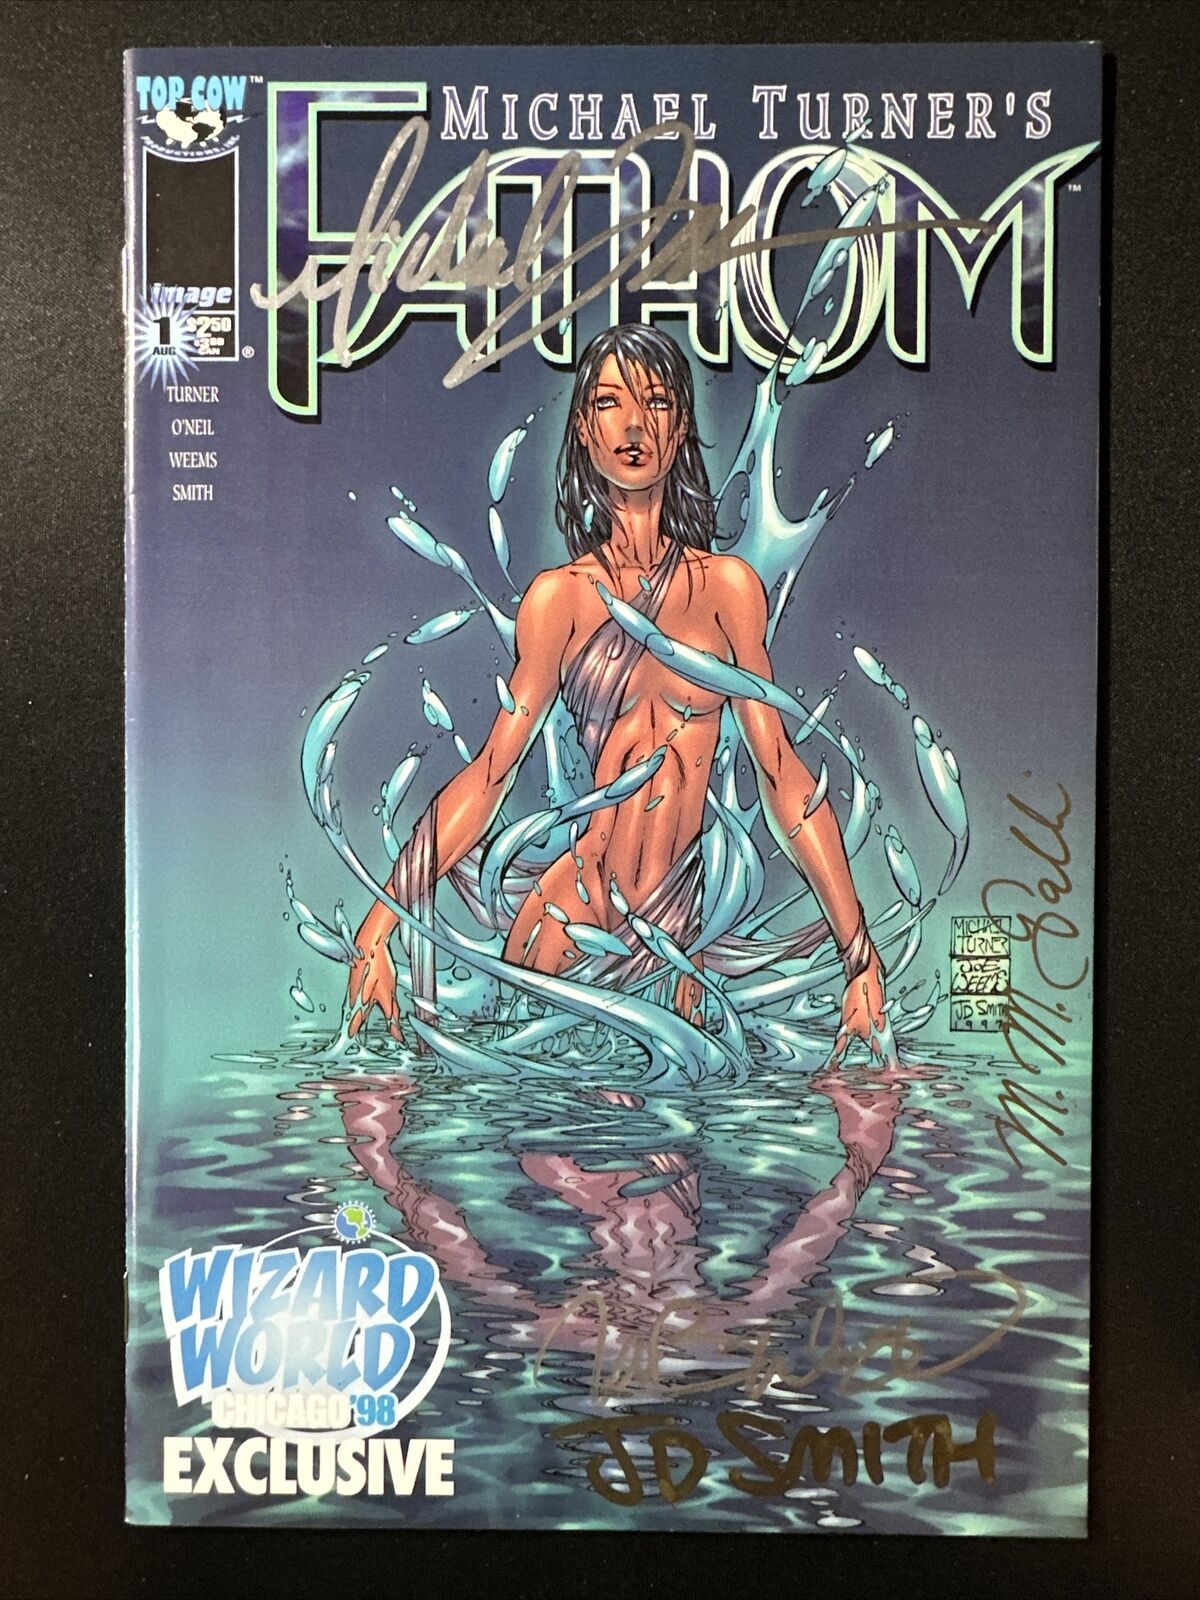 Fathom #1 Wizard World Chicago Signed x4 Turner Weems Smith Top Cow VF/NM *A1